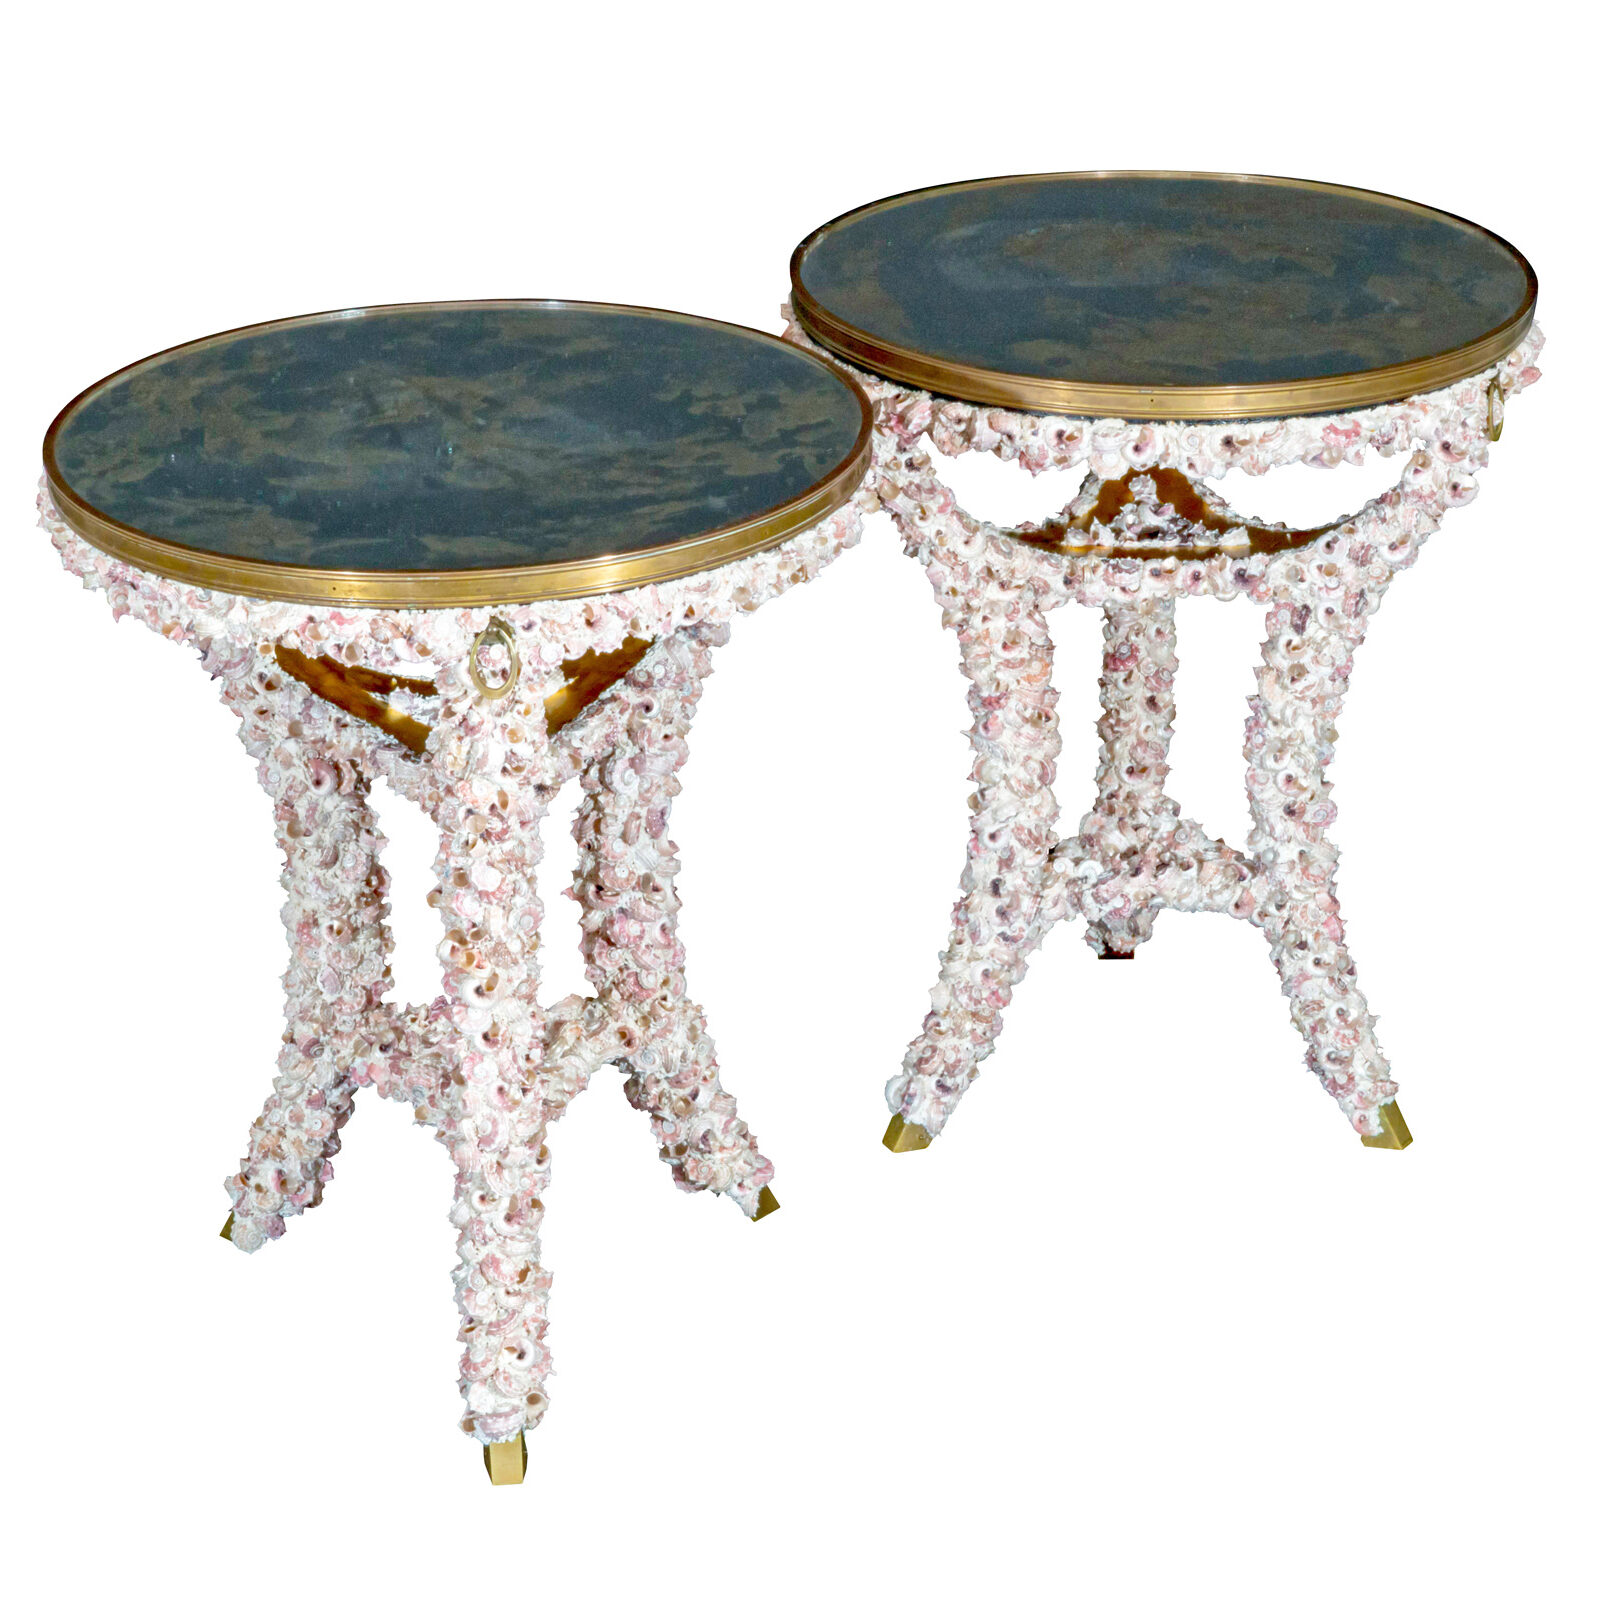 Pearlescent Seashell Encrusted Side Tables